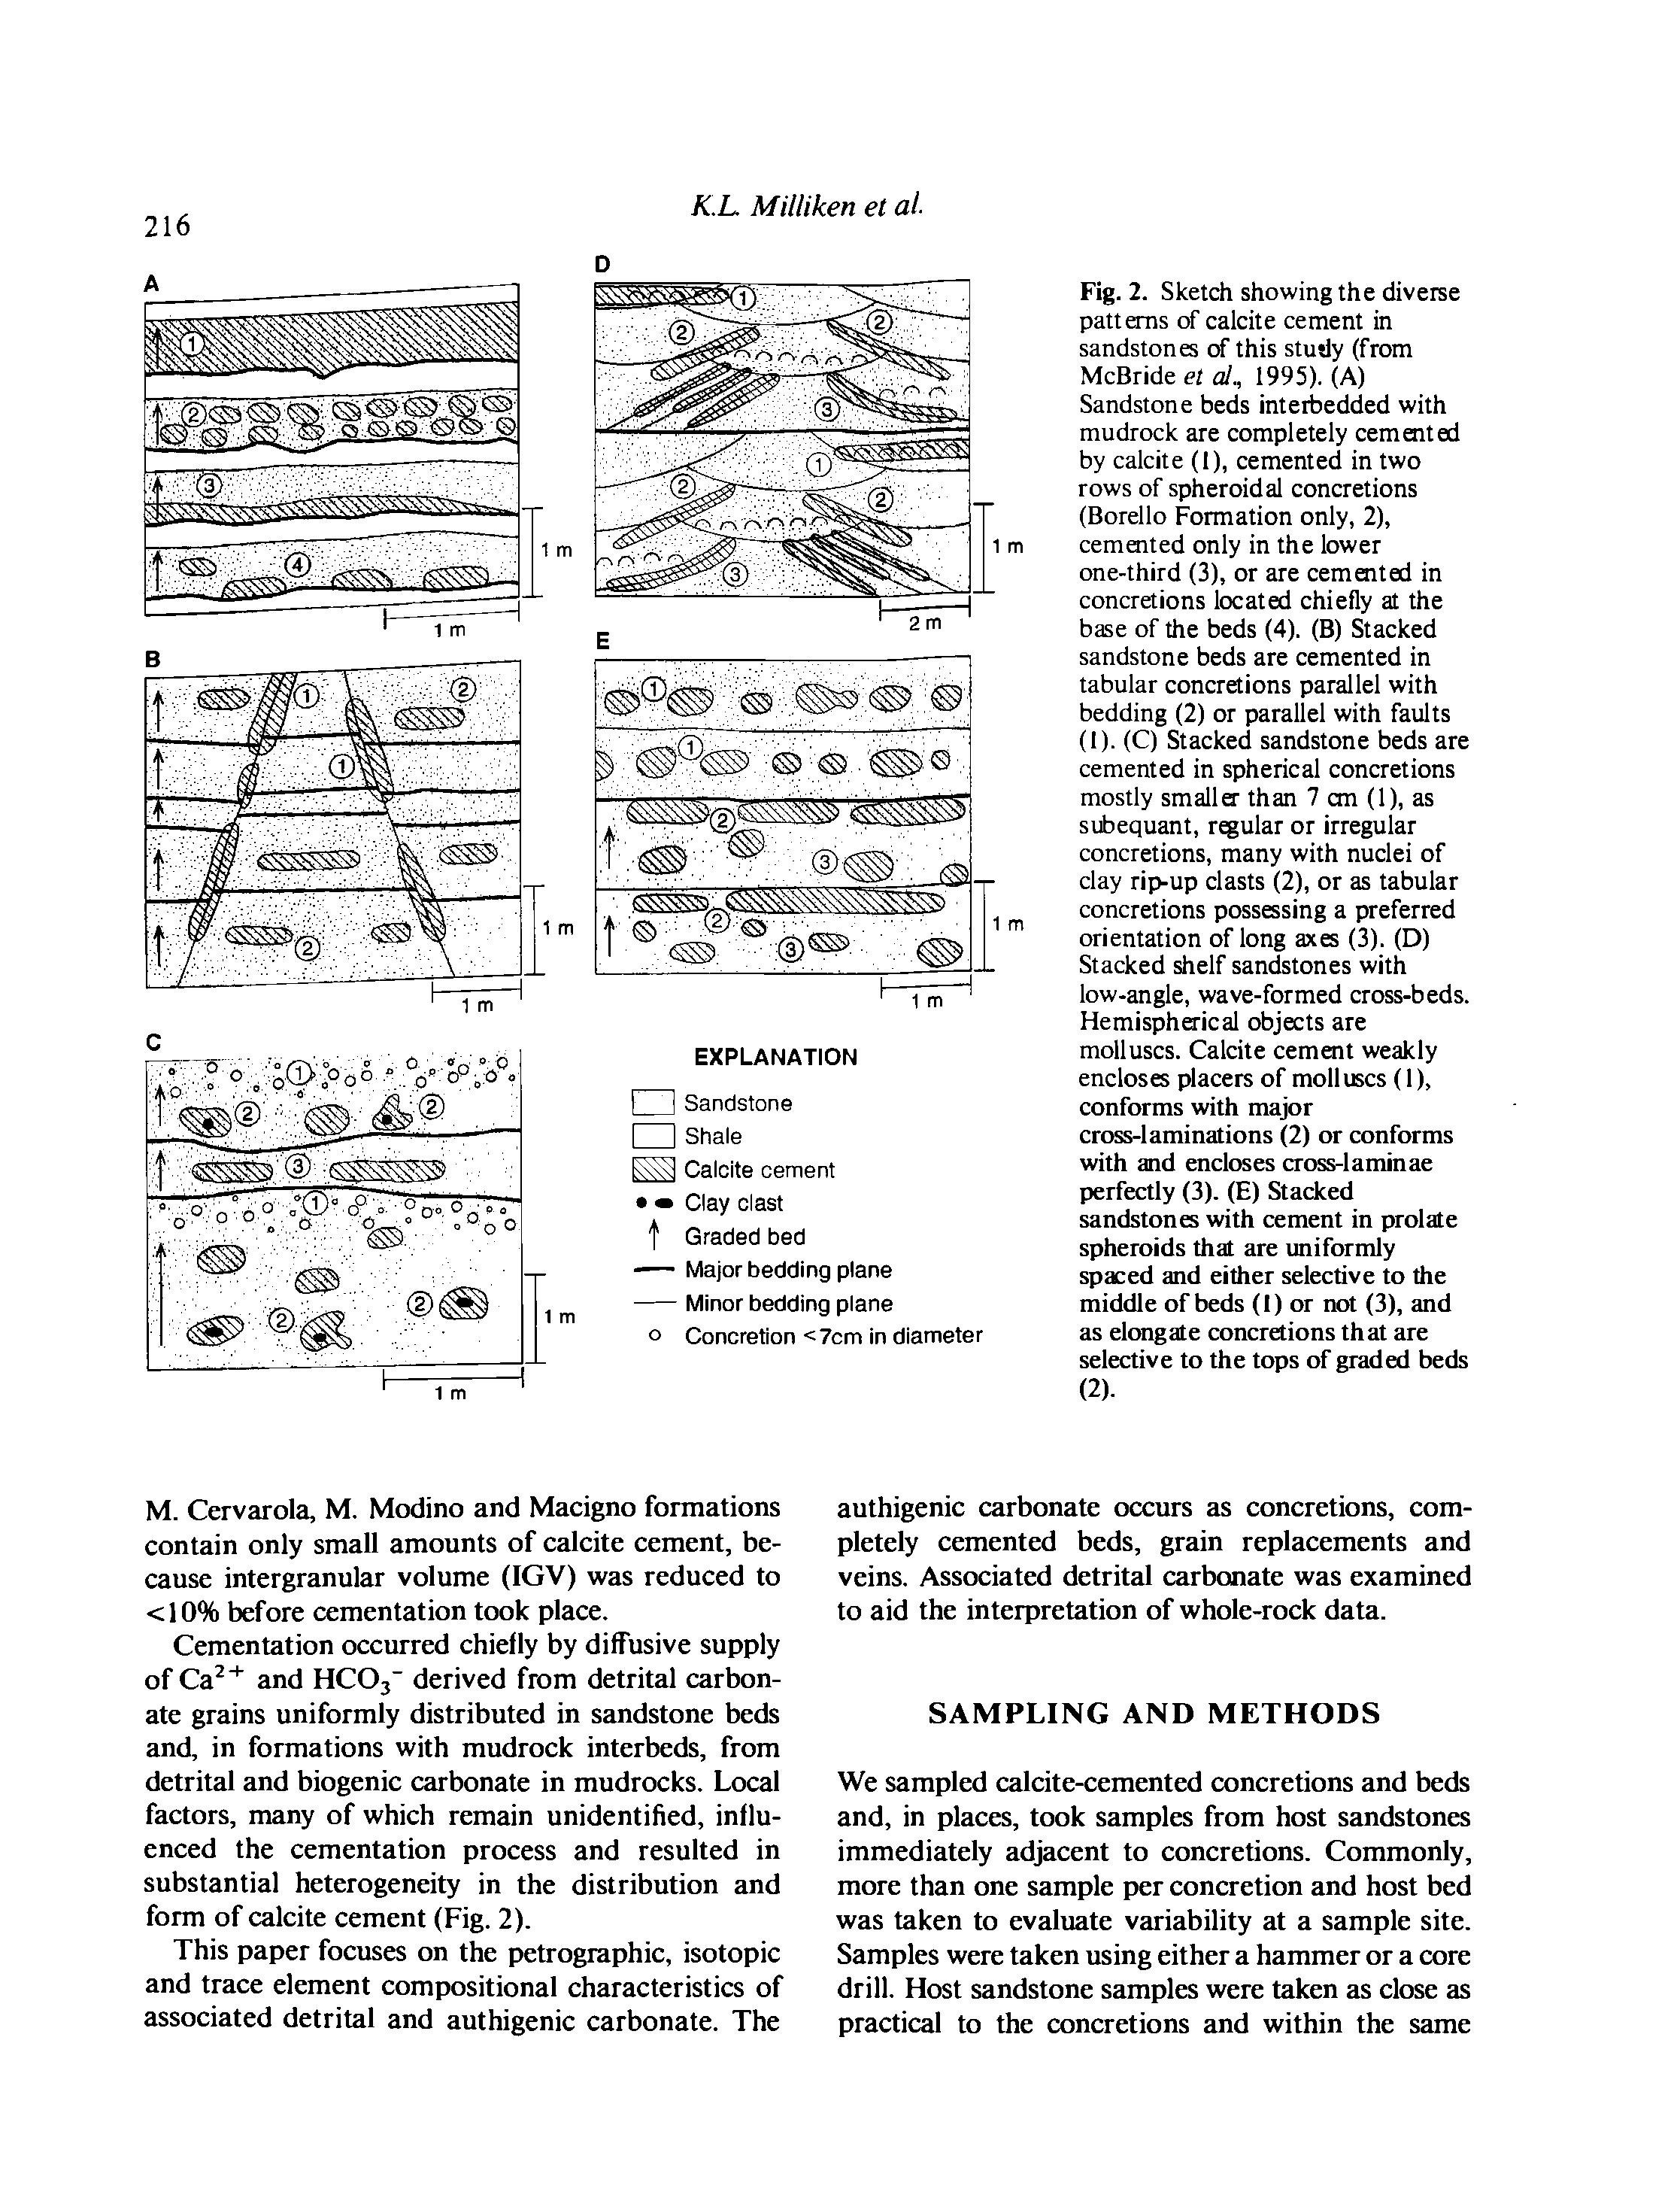 Fig. 2. Sketch showing the diverse patterns of calcite cement in sandstones of this study (from McBride el al., 1995). (A) Sandstone beds inteibedded with mudrock are completely cemented by calcite (1), cemented in two rows of spheroidal concretions (Borello Formation only, 2), cemented only in the lower one-third (3), or are cemented in concretions located chiefly at the base of the beds (4). (B) Stacked sandstone beds are cemented in tabular concretions parallel with bedding (2) or parallel with faults...